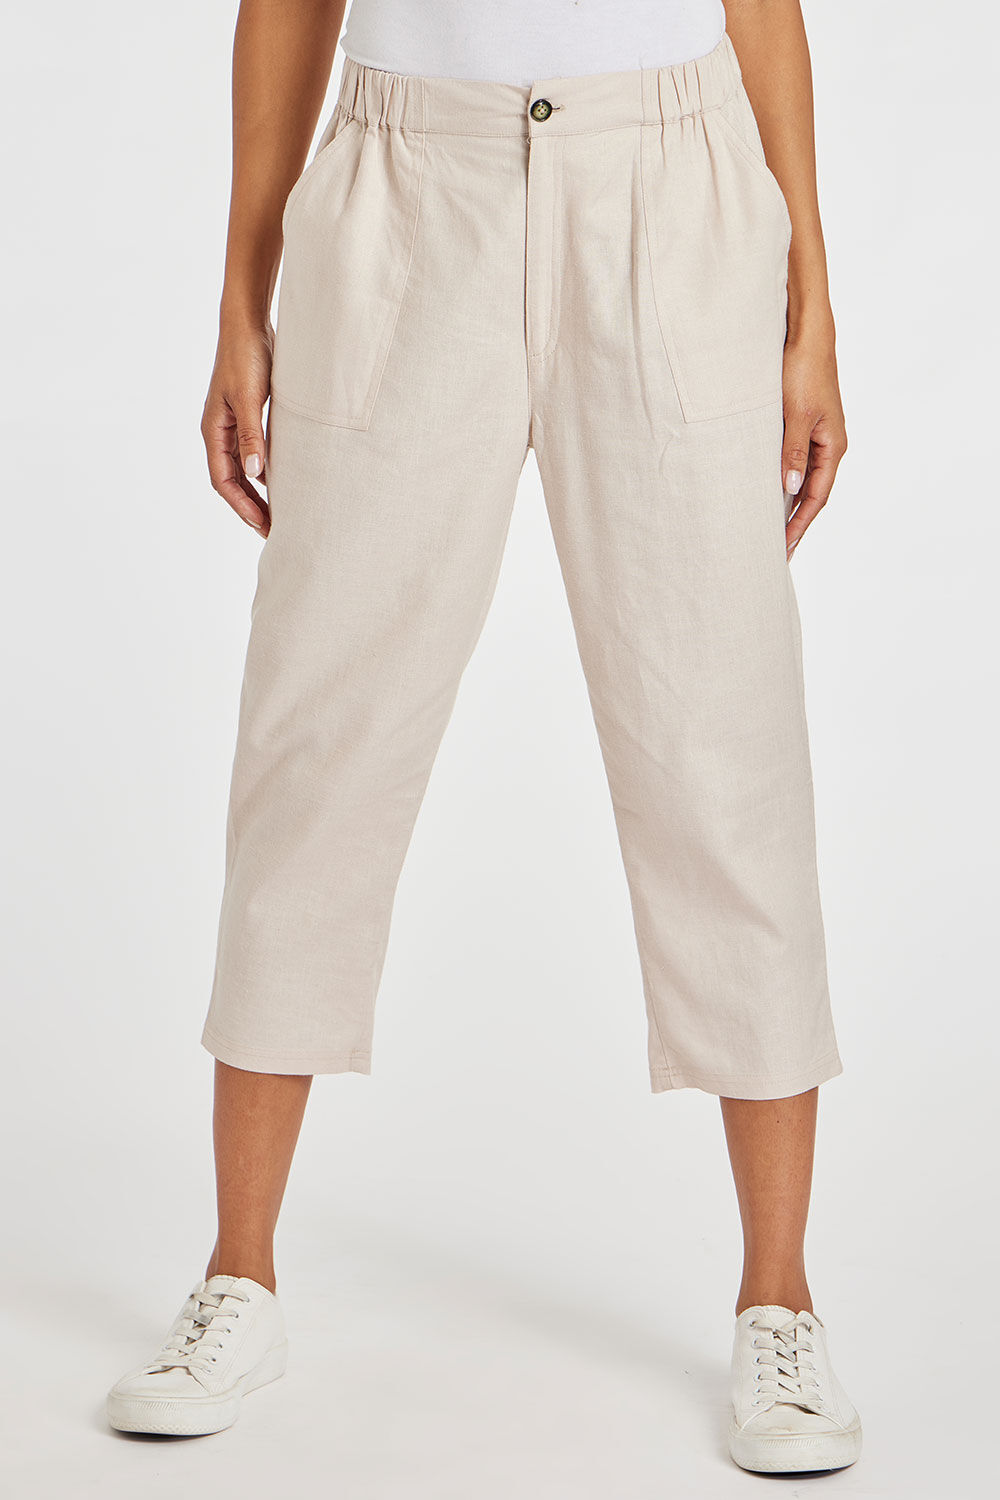 Bonmarche Stone Tapered Cropped Linen Trousers With Button Detail, Size: 10